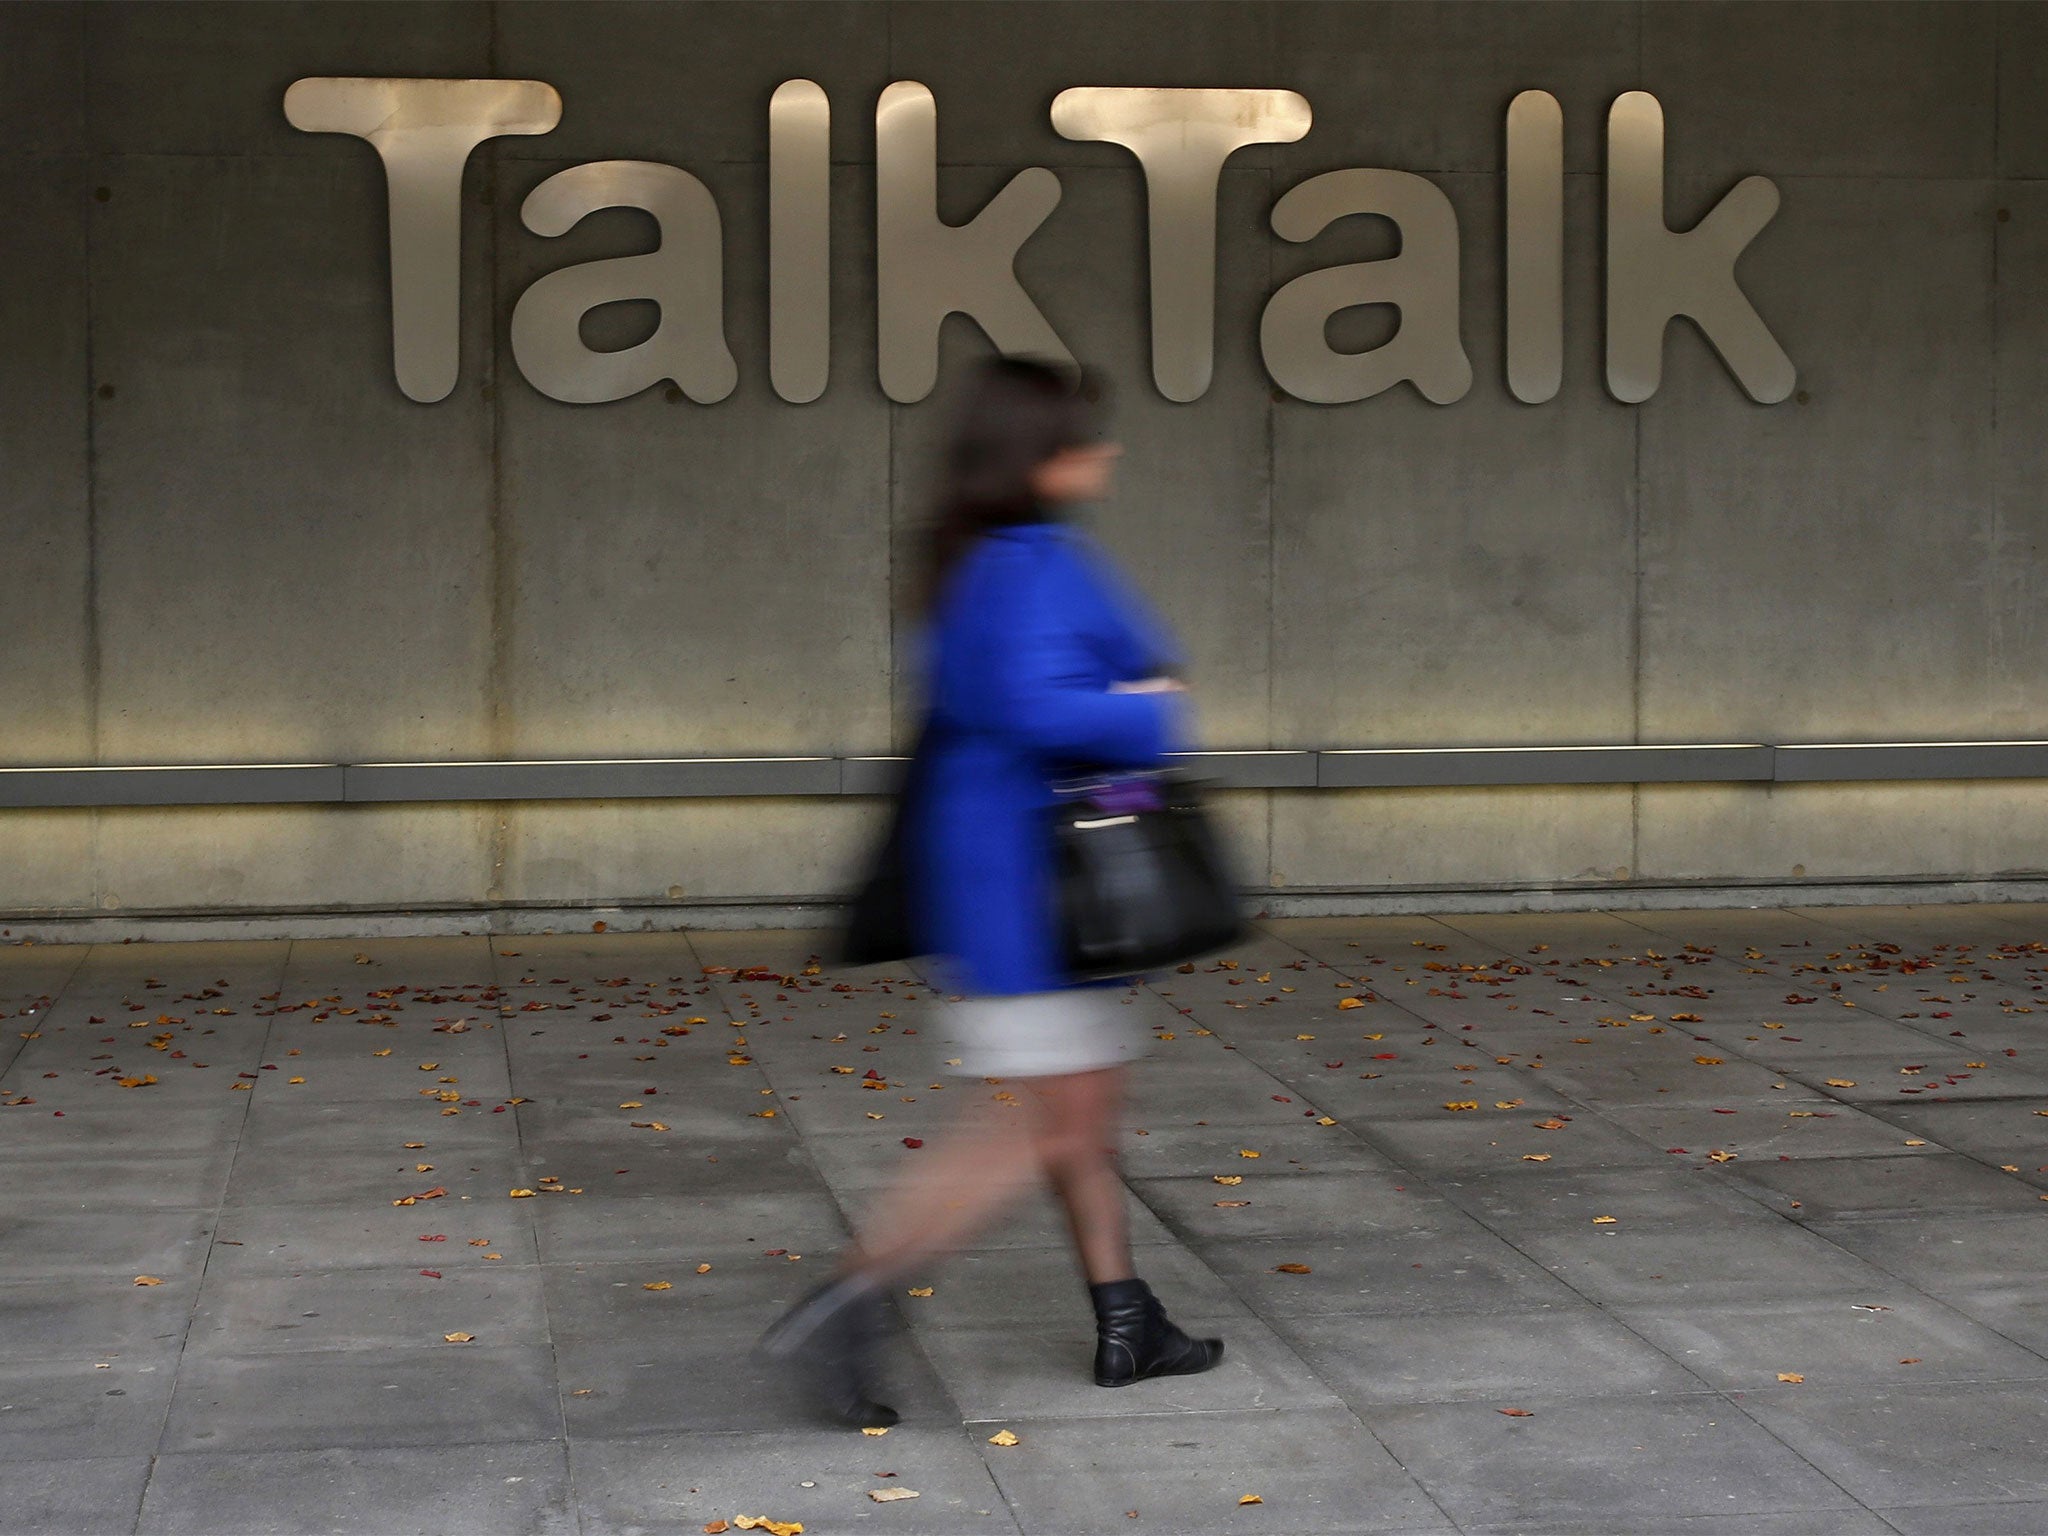 Up to four million people may have been affected by the TalkTalk hack